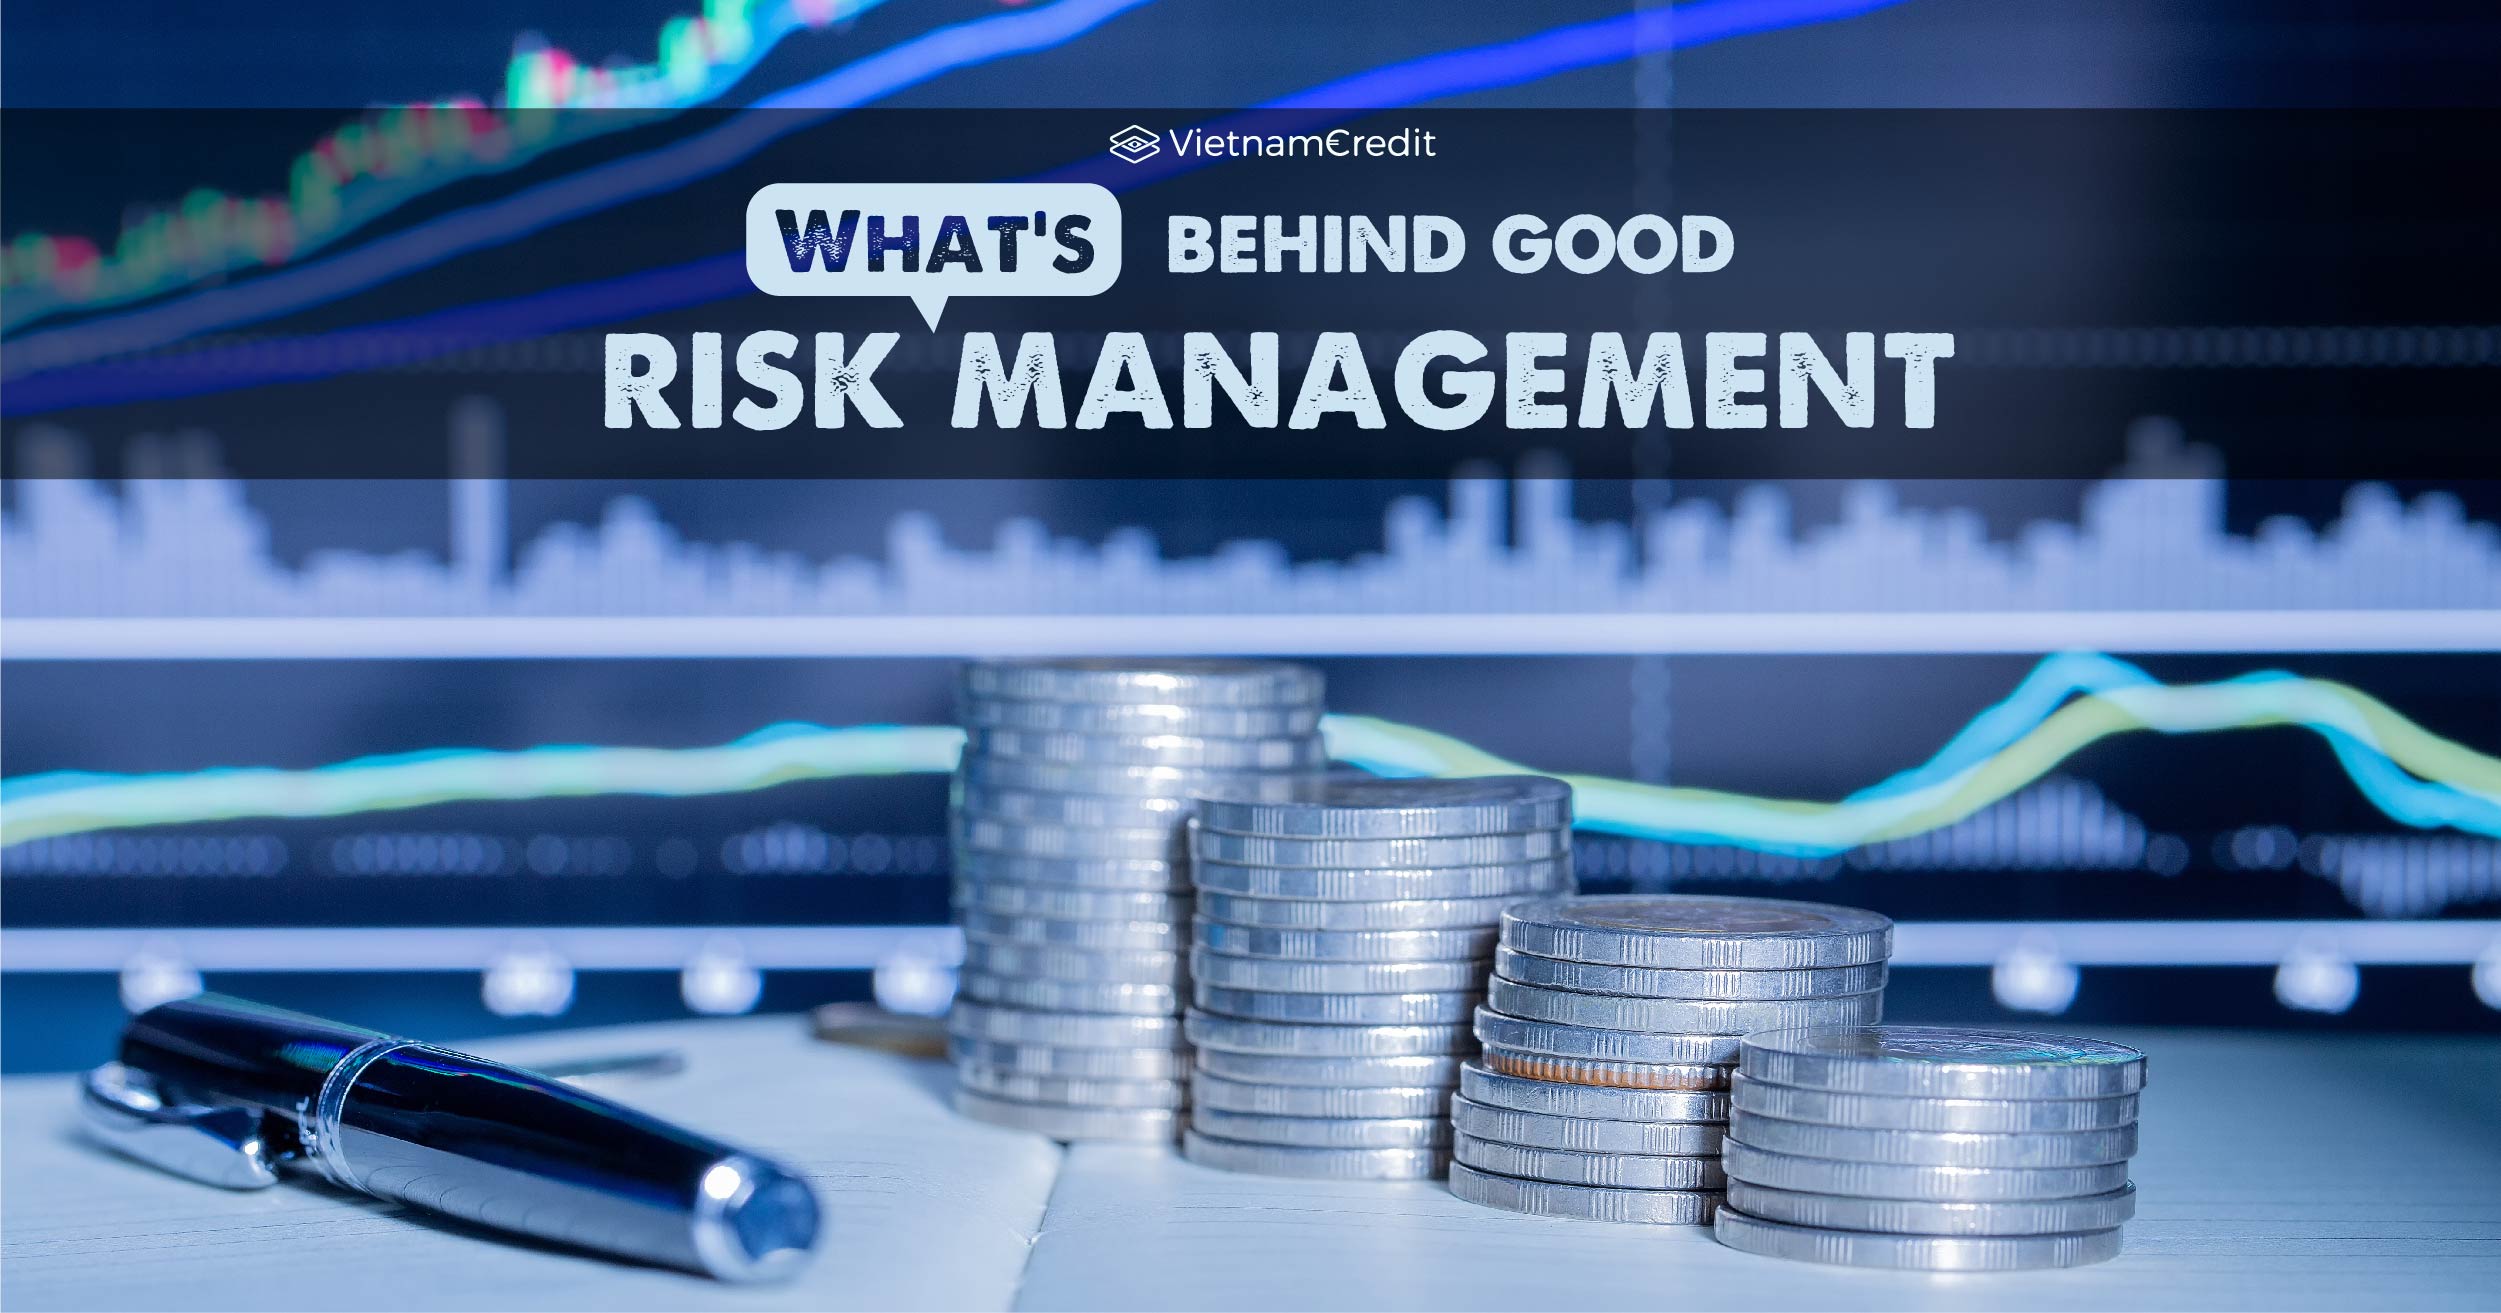 What's behind good risk management